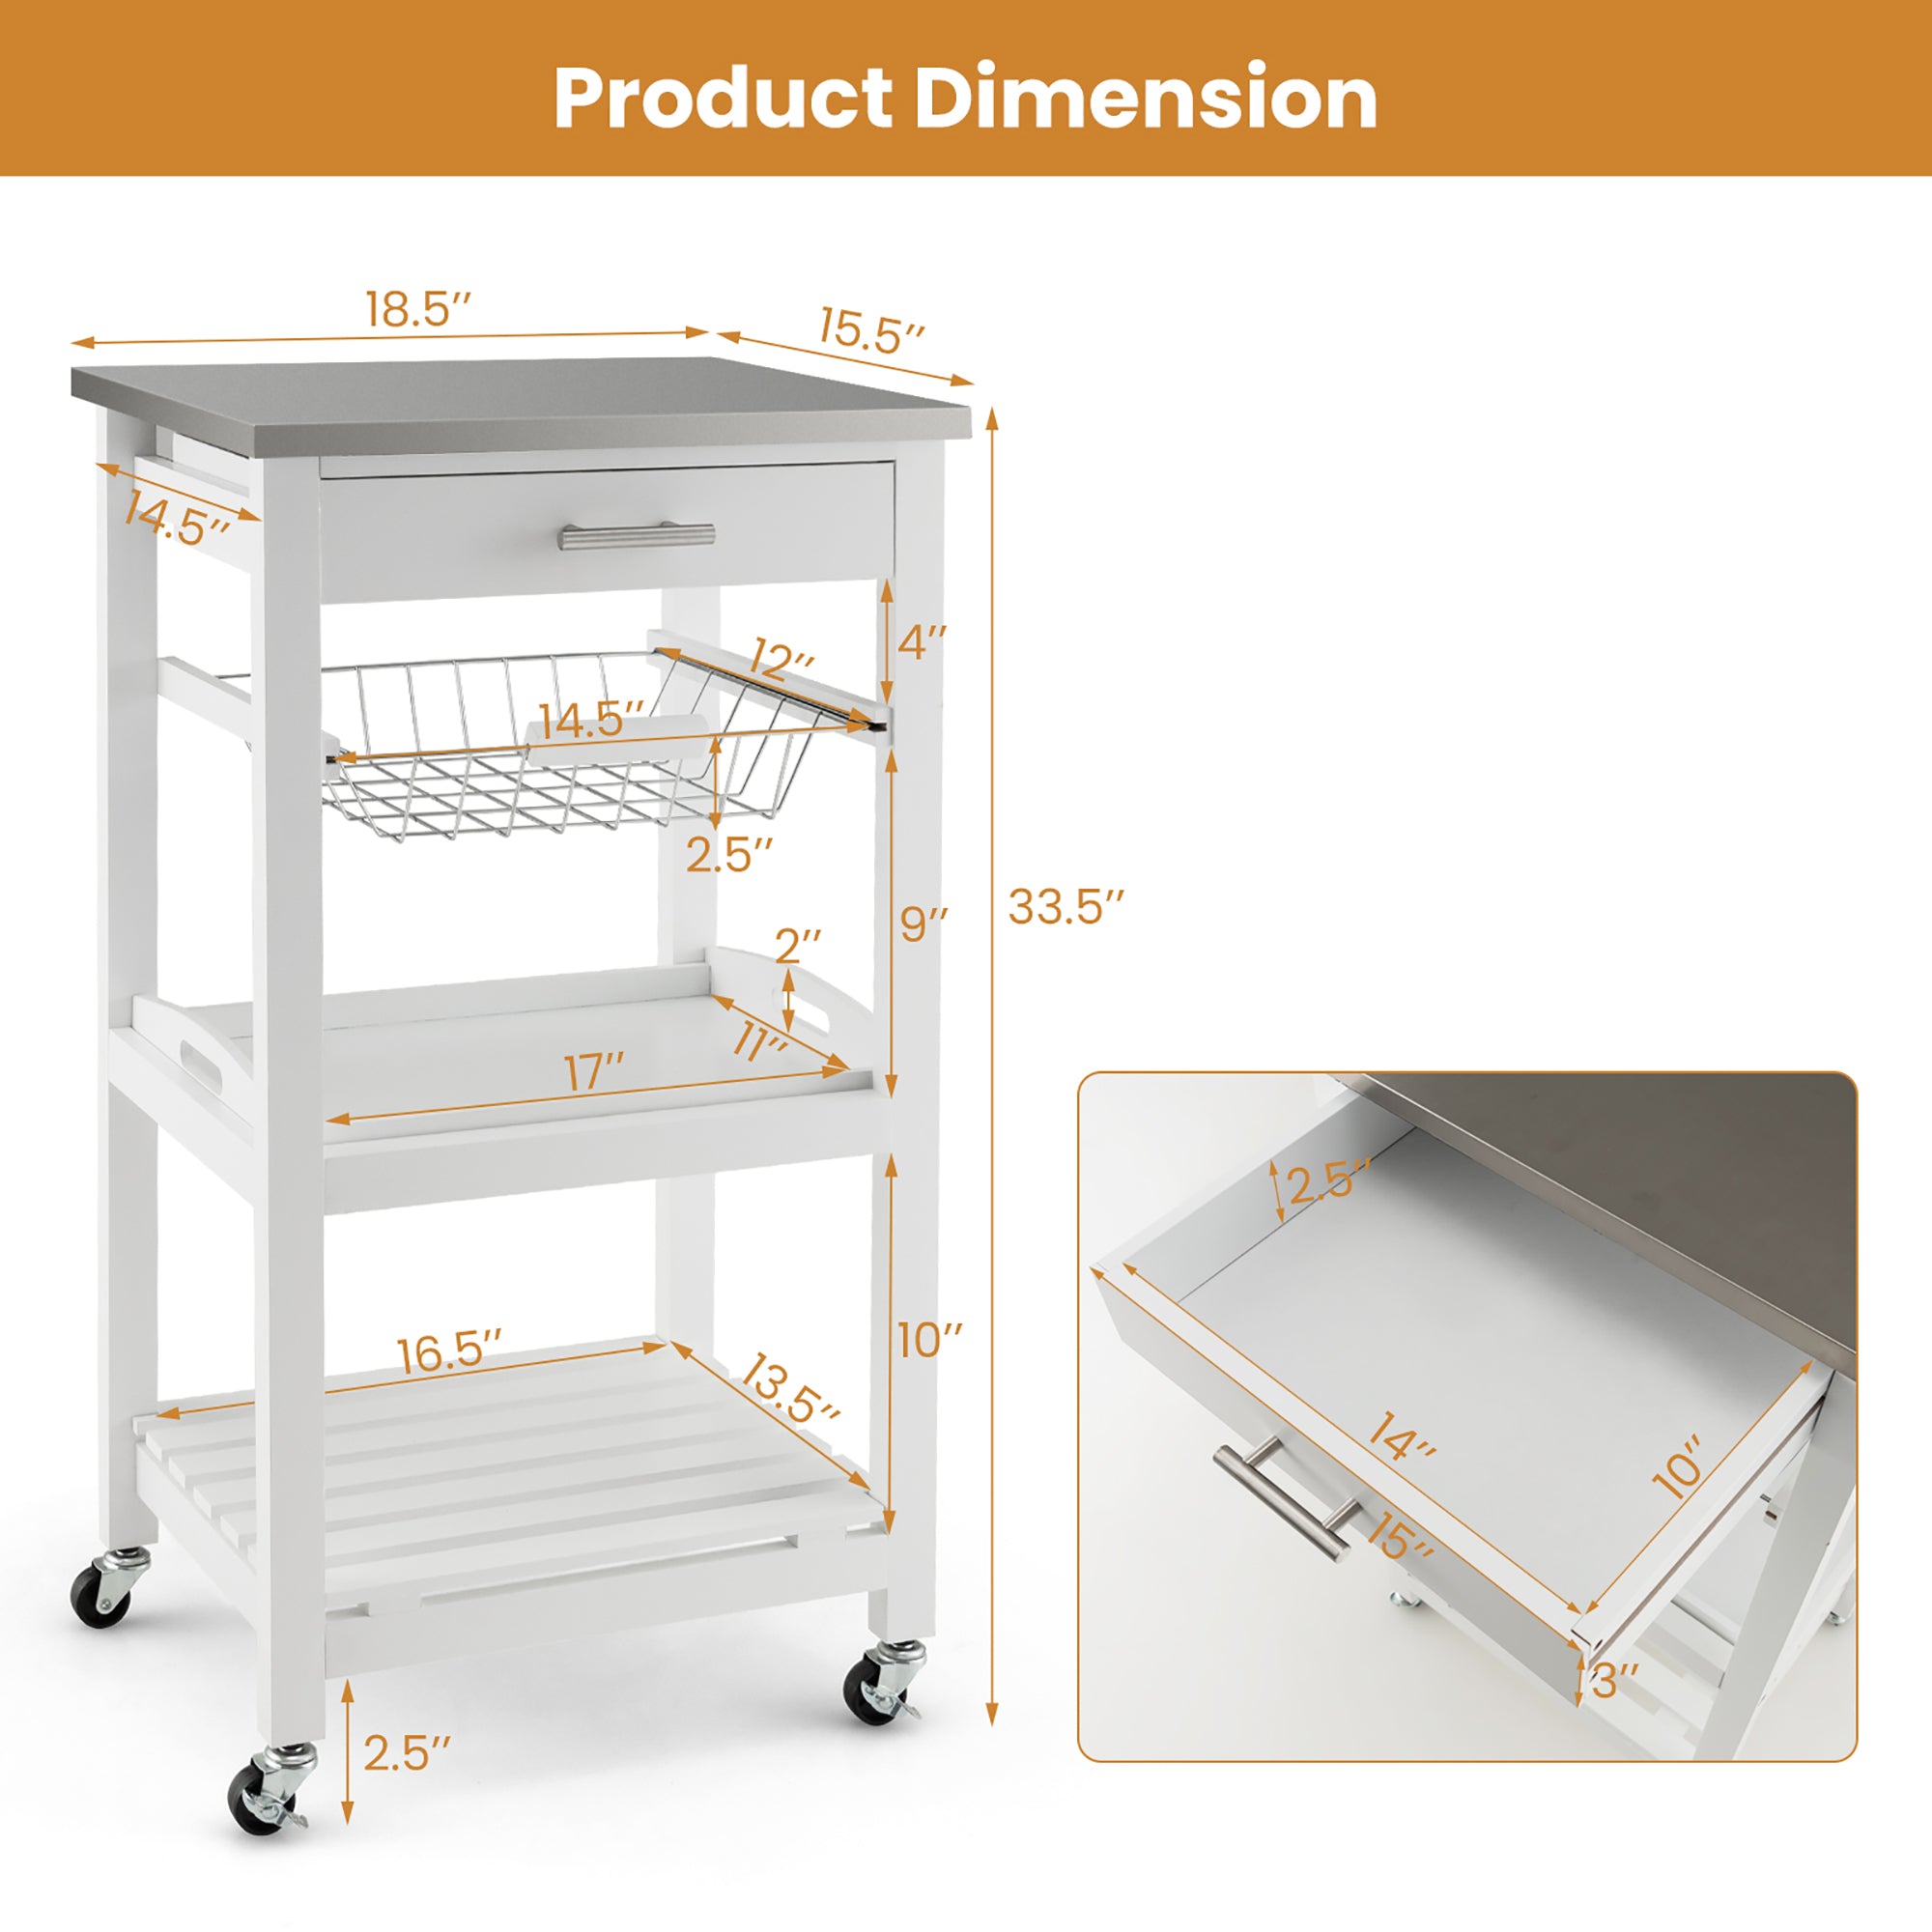 Costway Compact Kitchen Island Cart Rolling Service Trolley withStainless Steel Top Basket